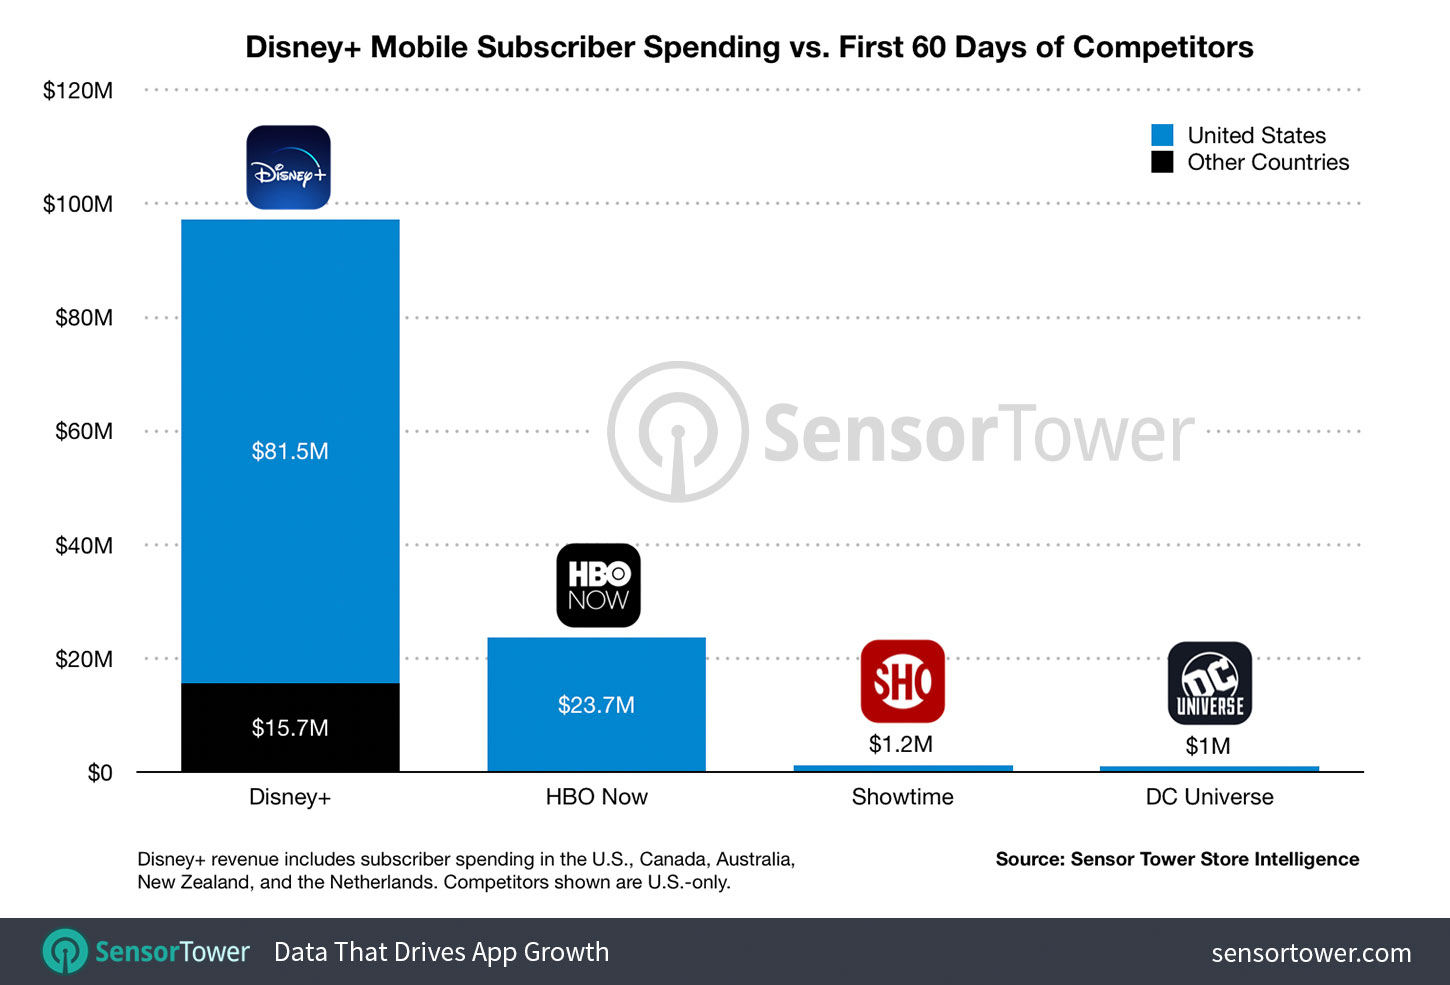 Frontline | Disney + is the most downloaded app in the United States in the fourth quarter of 2019, which is twice as much as TikTok